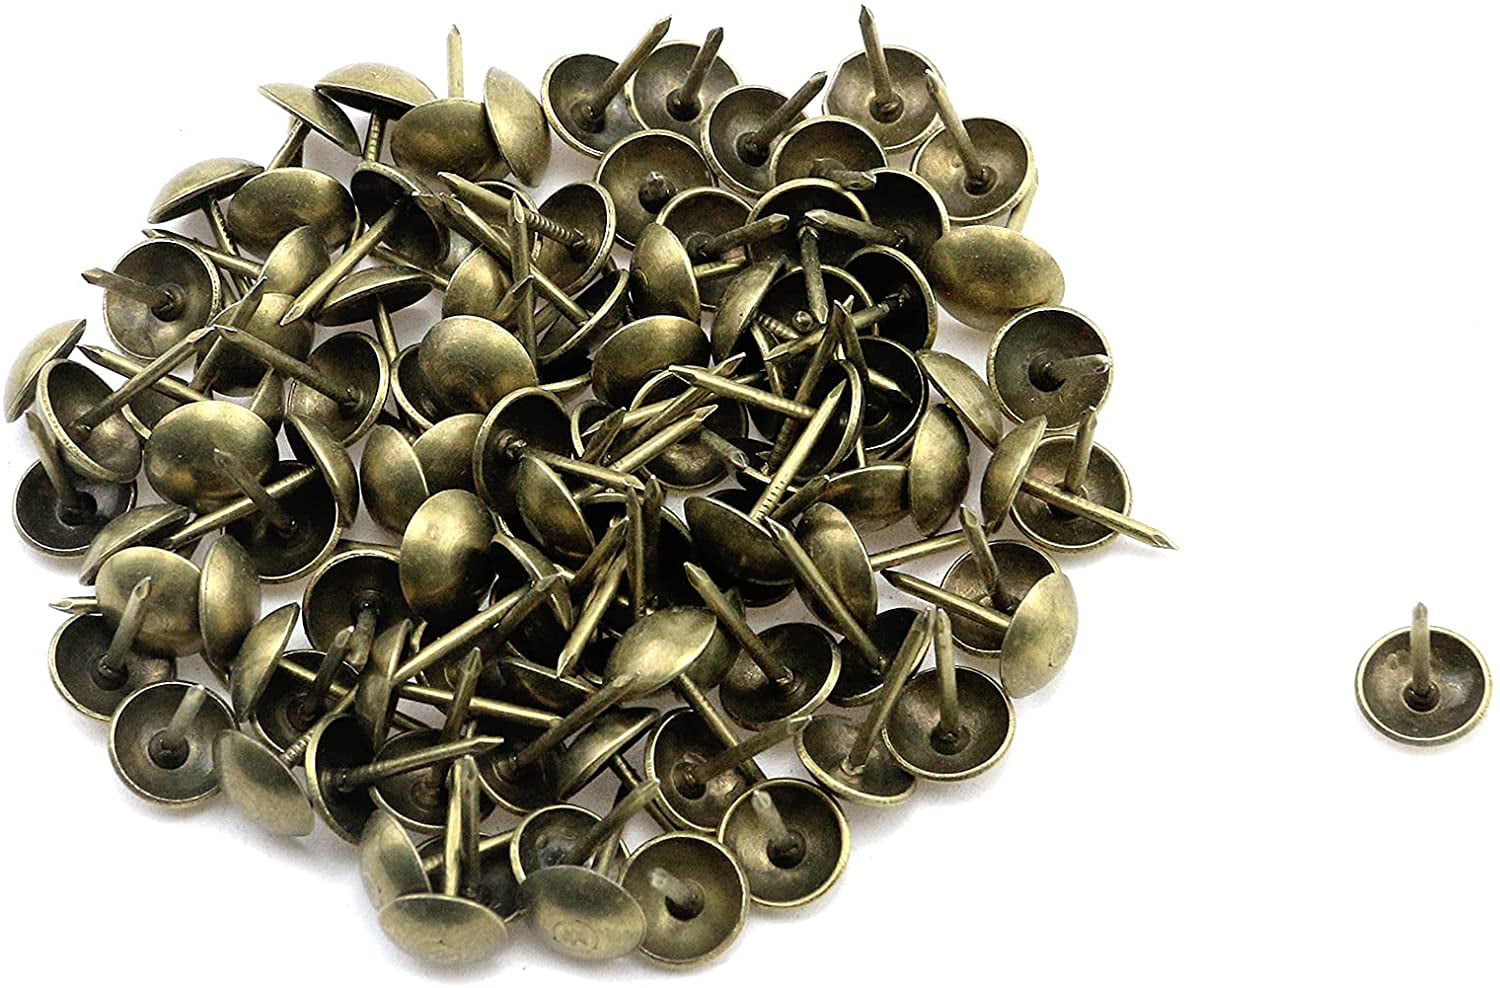 25 old BRASS TACKS 3/8” Diameter vintage upholstery nails domed round heads 